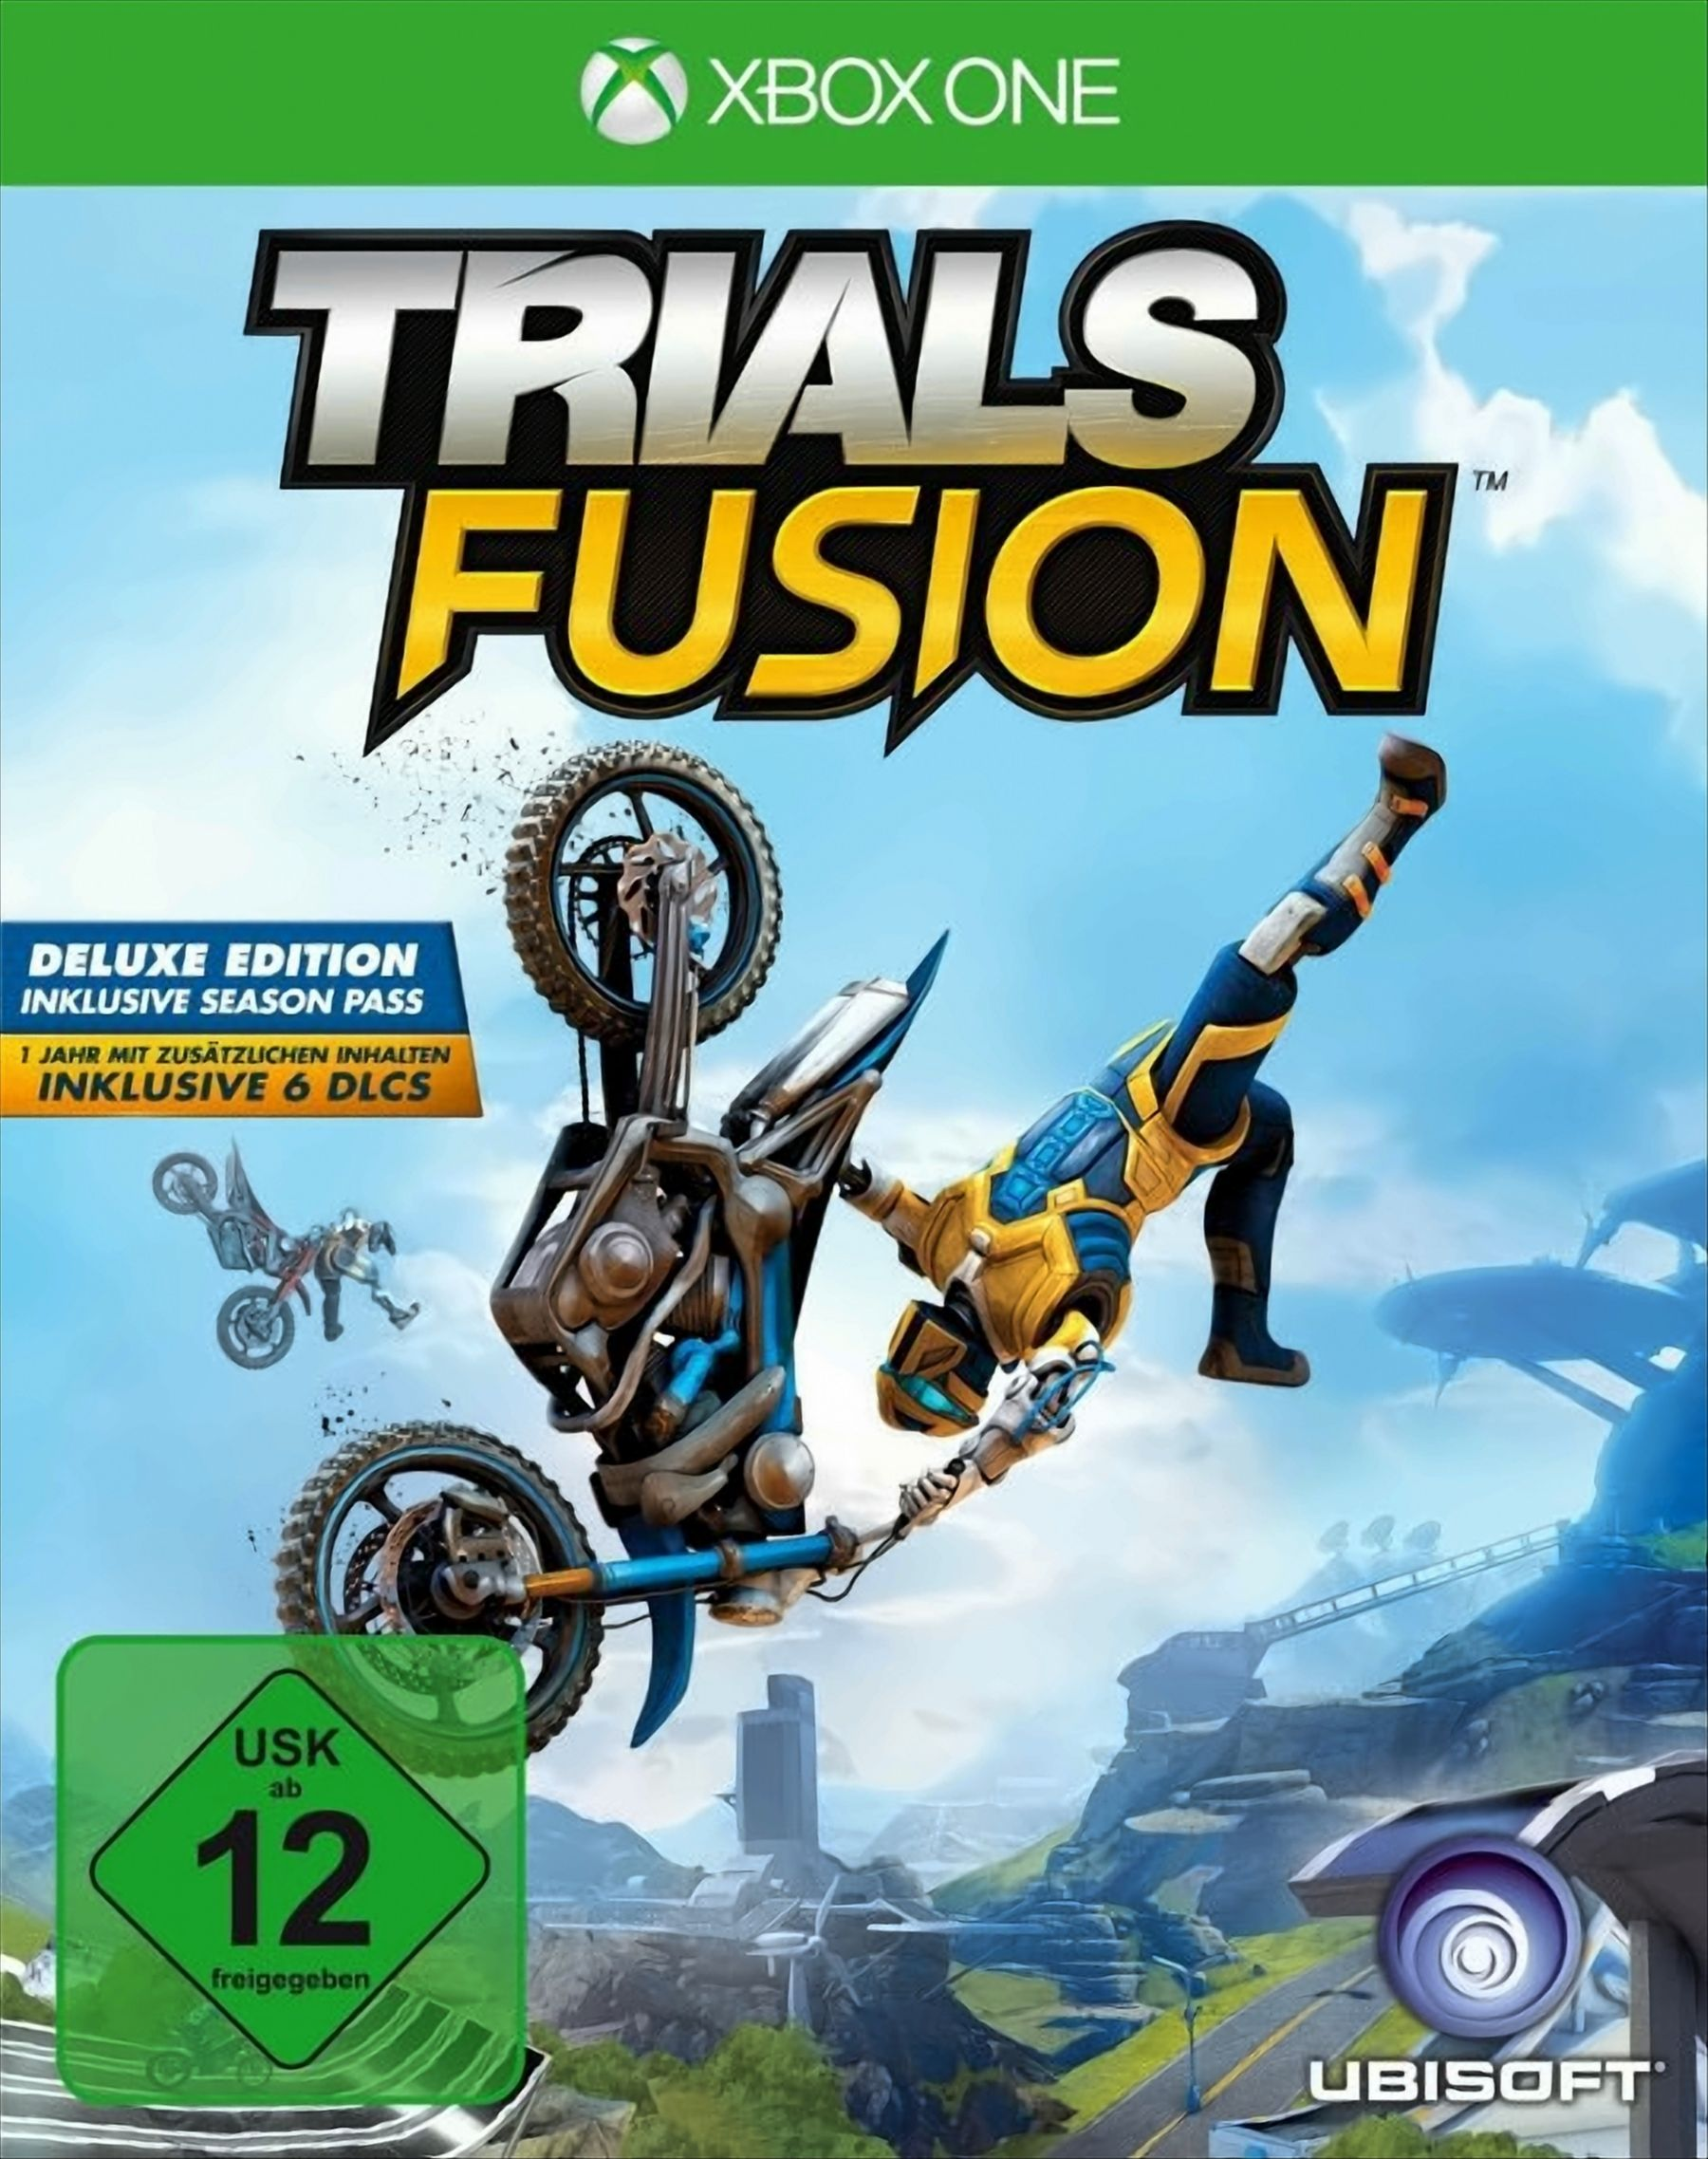 Deluxe - One] Fusion [Xbox Edition Trials -